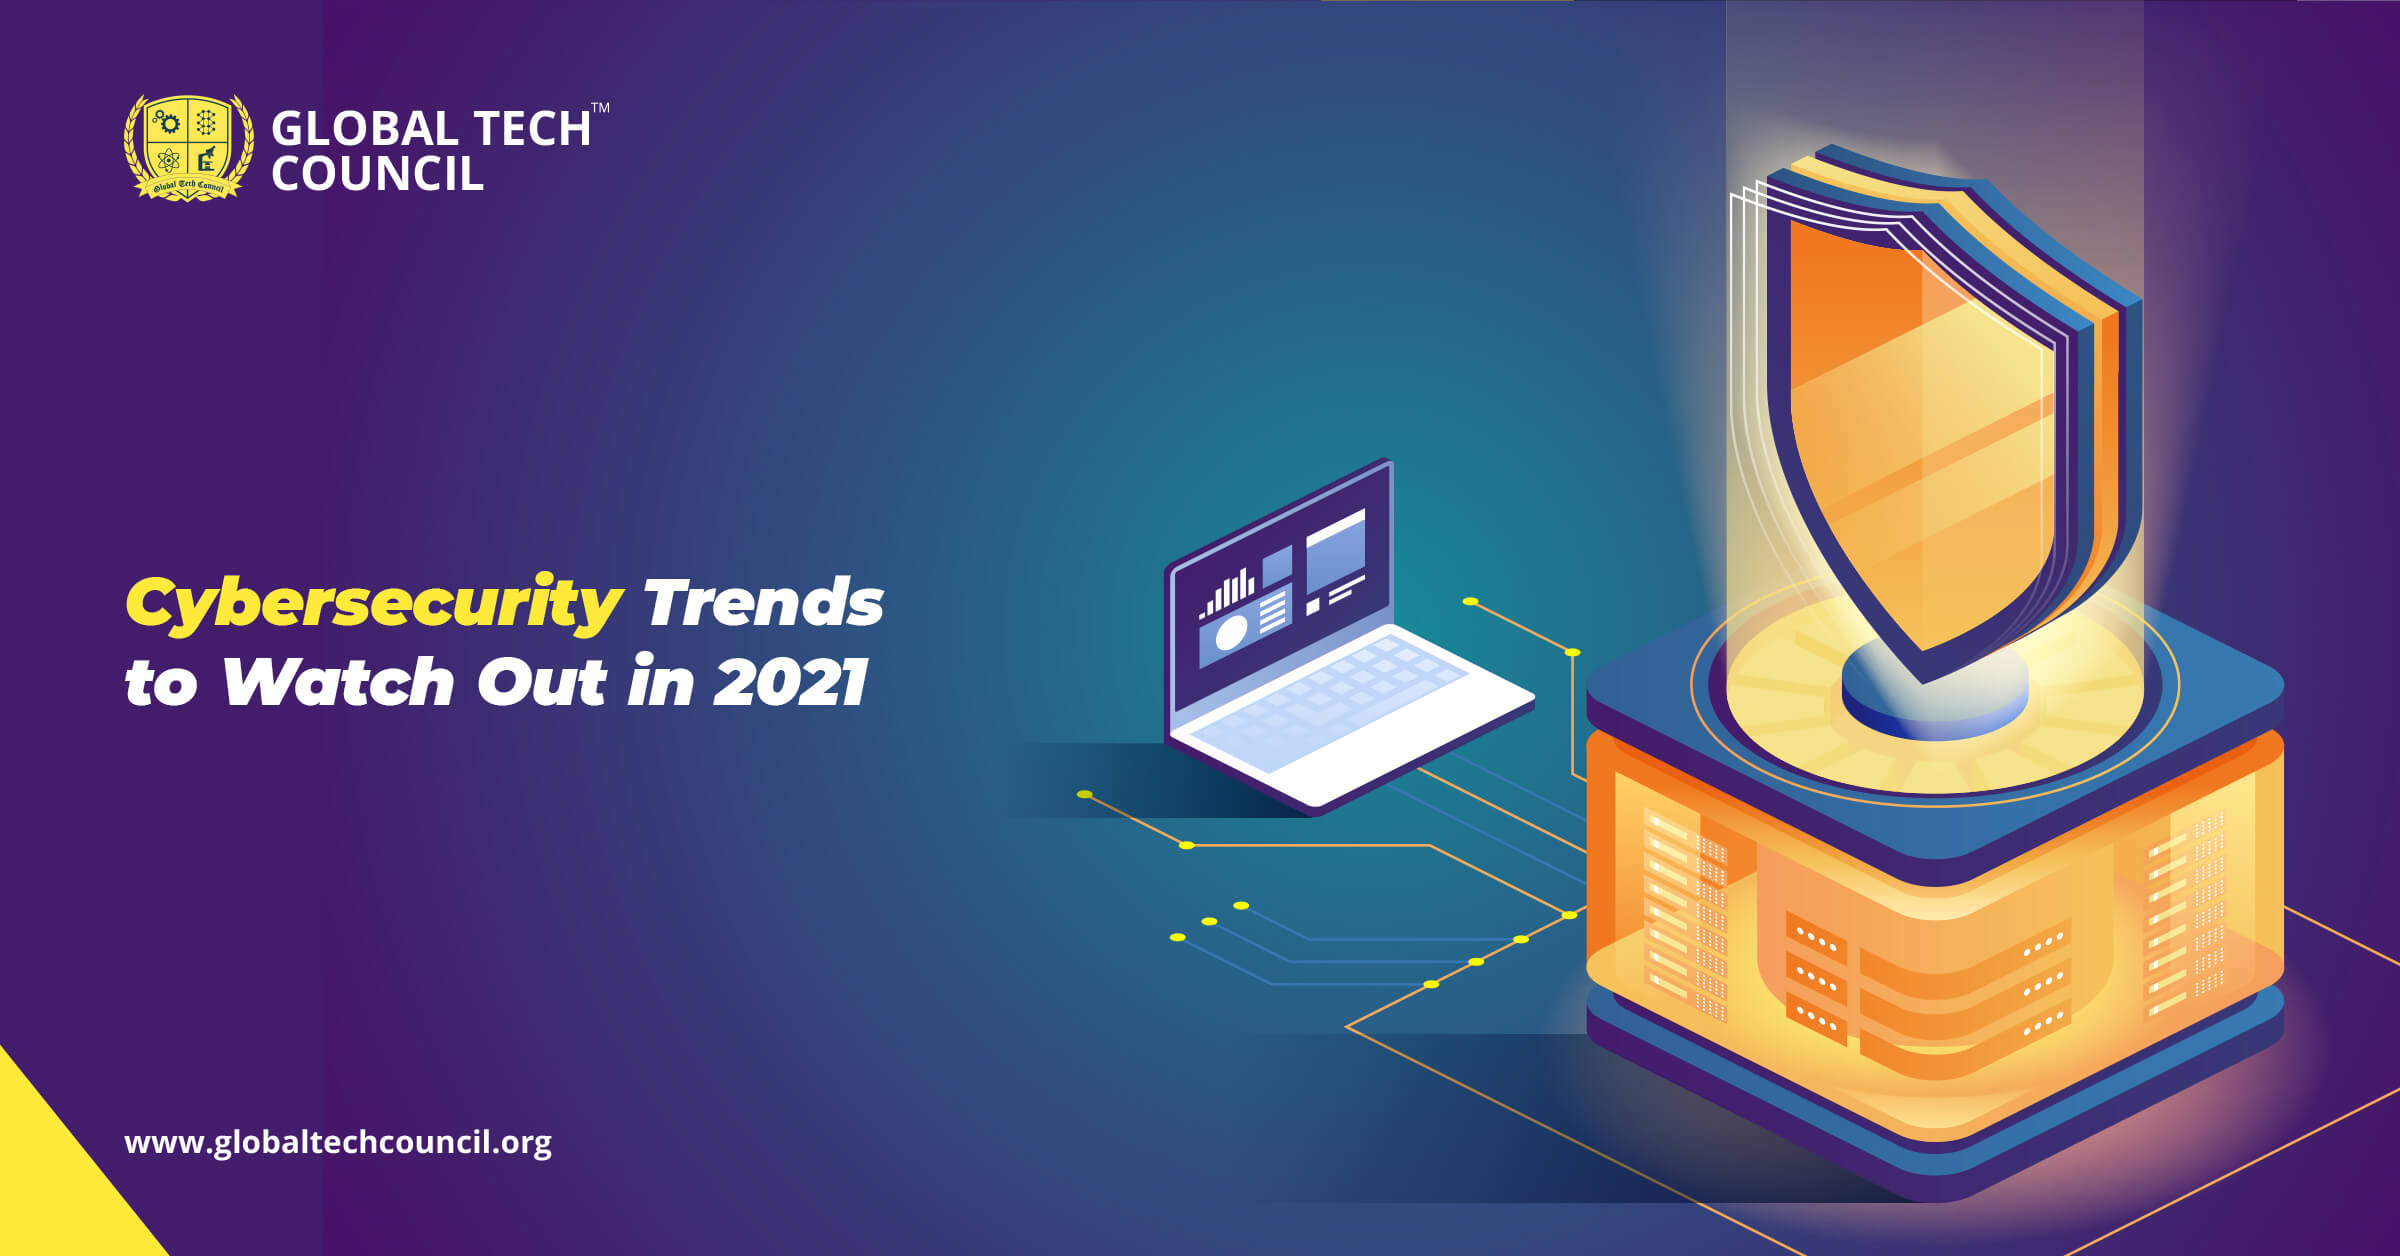 Cybersecurity Trends to Watch Out in 2021